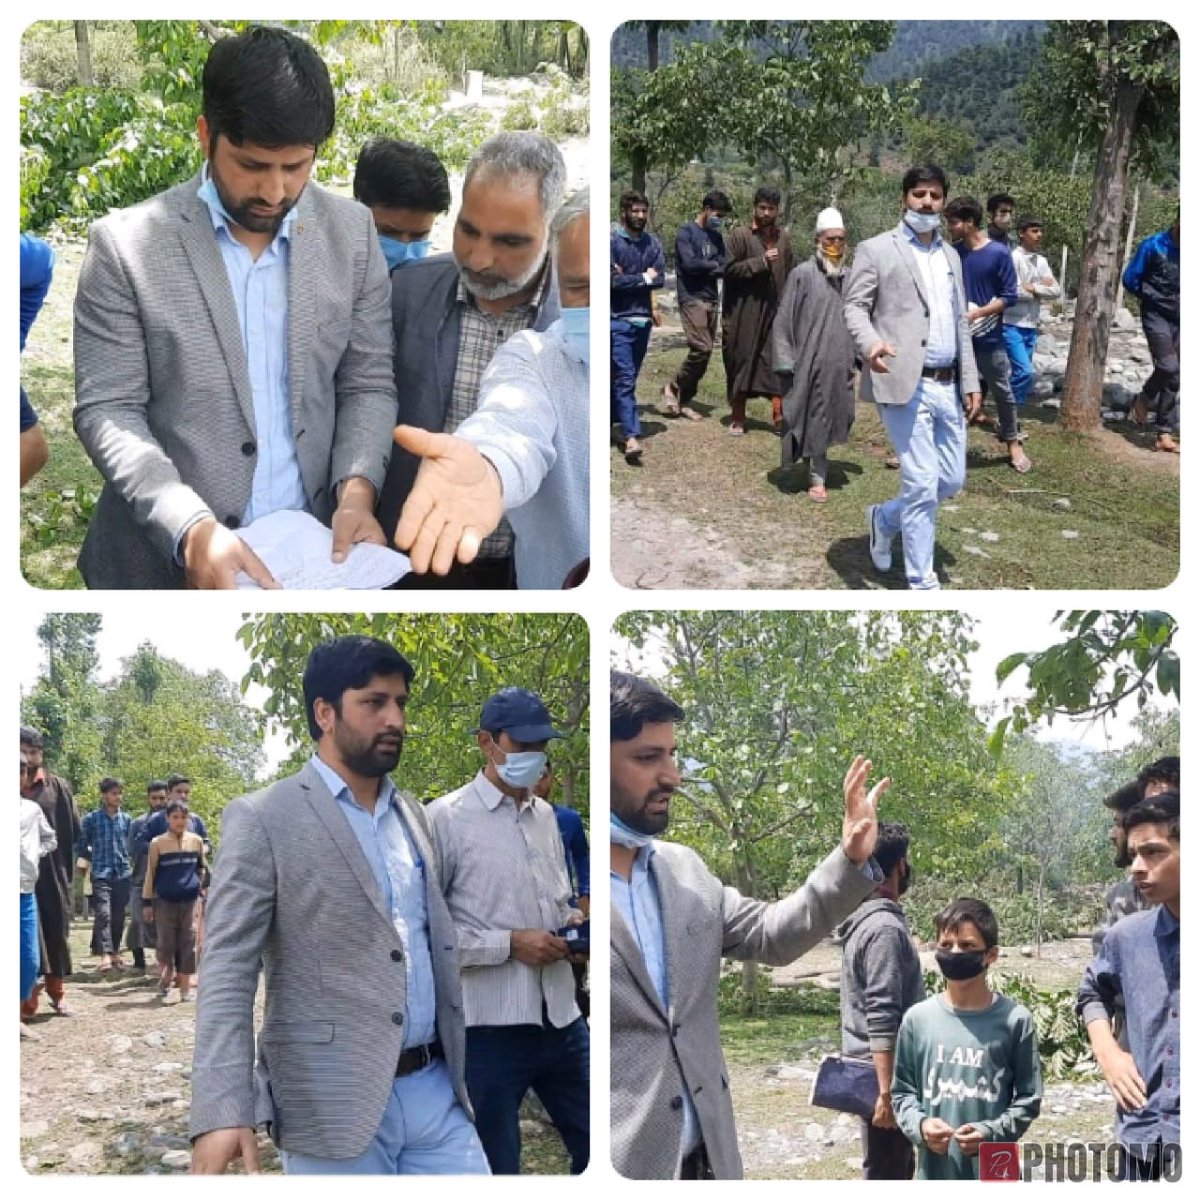 Revenue team led by Tehsildar Sallar @5090Dr removed illegal encroachments on state land at Wahdhan

A play field with optimum facilities to be developed on the retrieved land

@diprjk @Farhat_faraz
@ddprsrinagar @DdcChairman @hilalshah786 @FOBAnantnag

https://t.co/3fMW8H099v https://t.co/WyYNmsHVuy